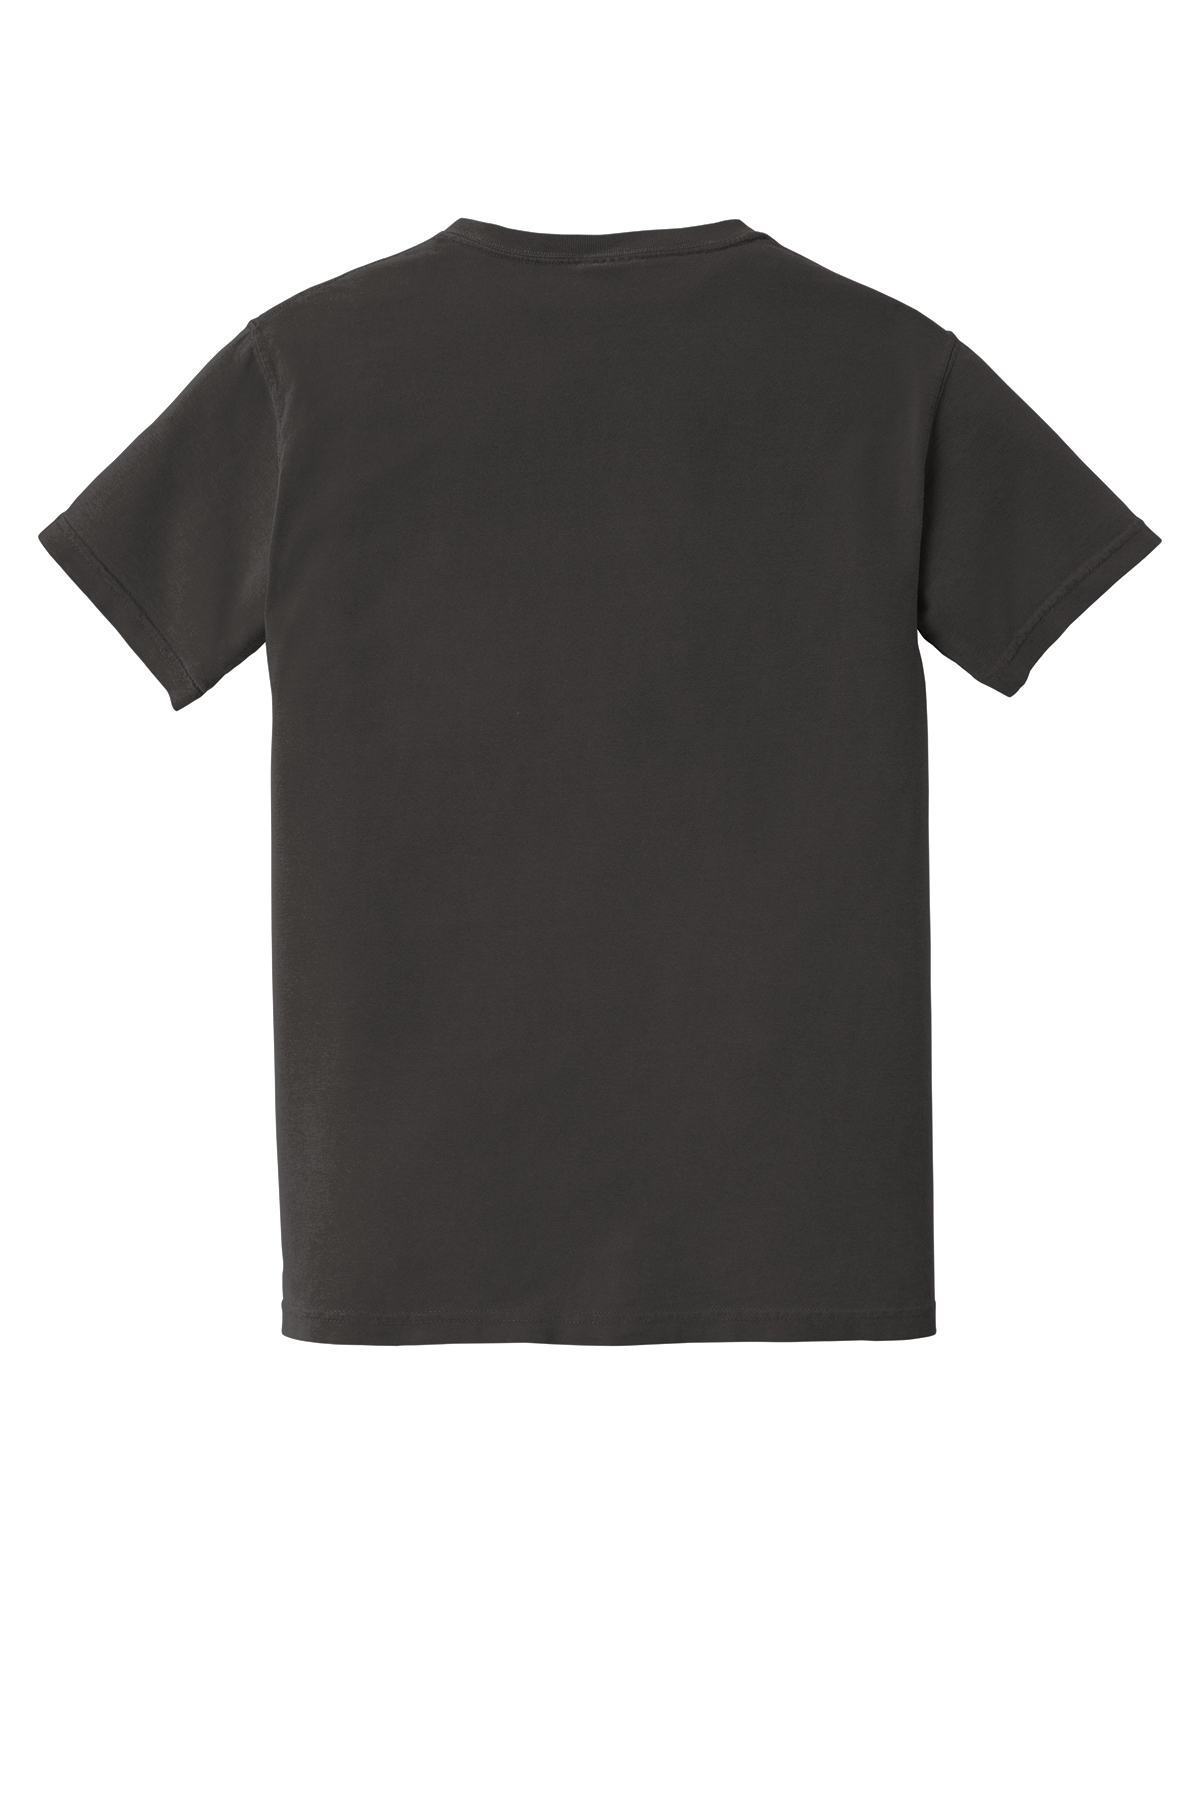 Comfort Colors Heavyweight Ring Spun Pocket Tee | Product | Company Casuals